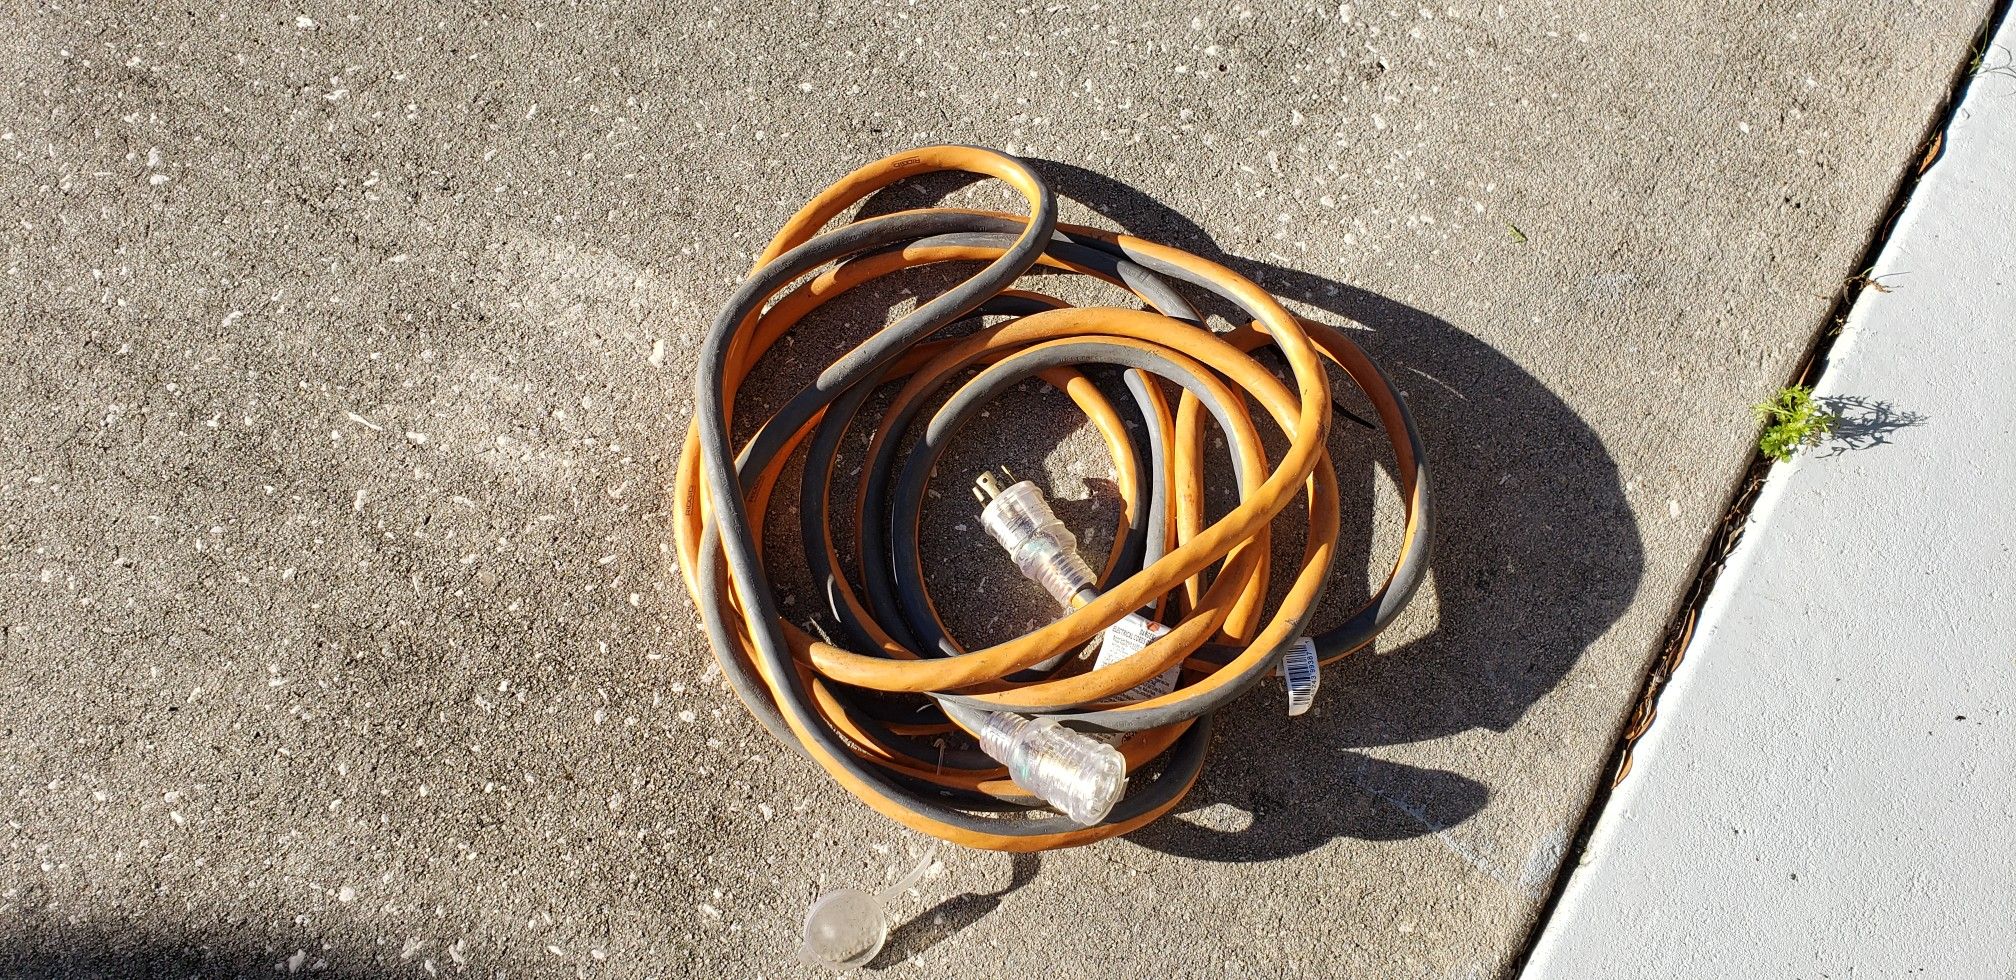 4 x 25 ft generator extension cords price is each